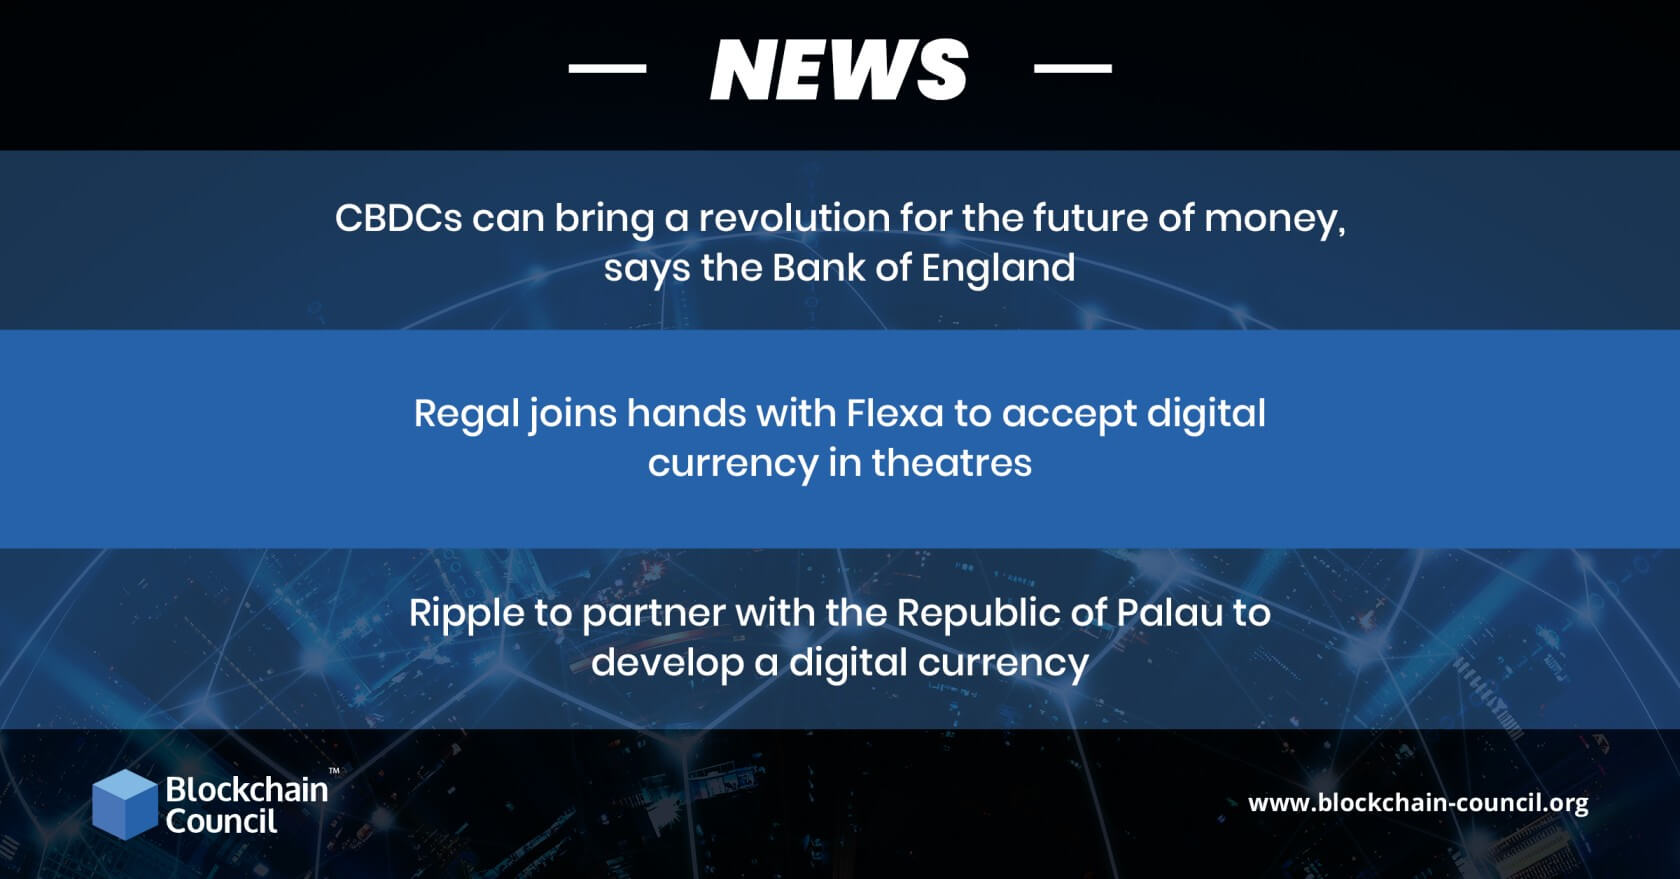 CBDCs can bring a revolution for the future of money, says the Bank of England (2)